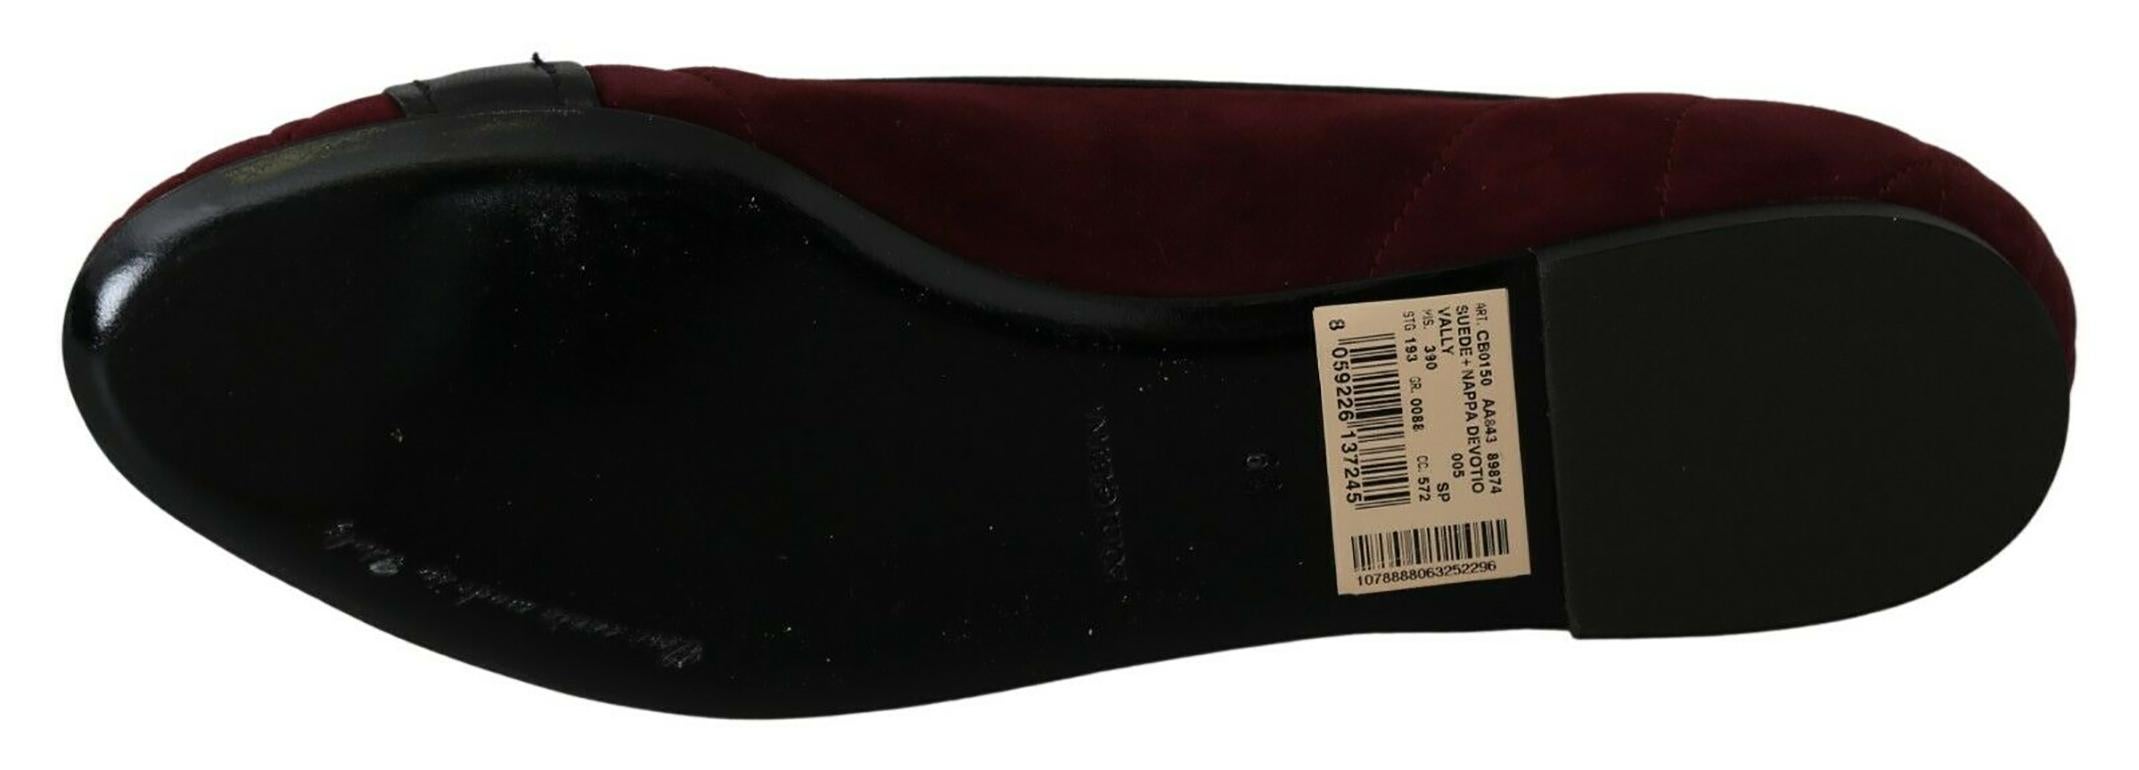 Dolce & Gabbana Bordeaux Suede Devotion Shoes Ballerina Flats Leather Burgundy In New Condition For Sale In WELWYN, GB